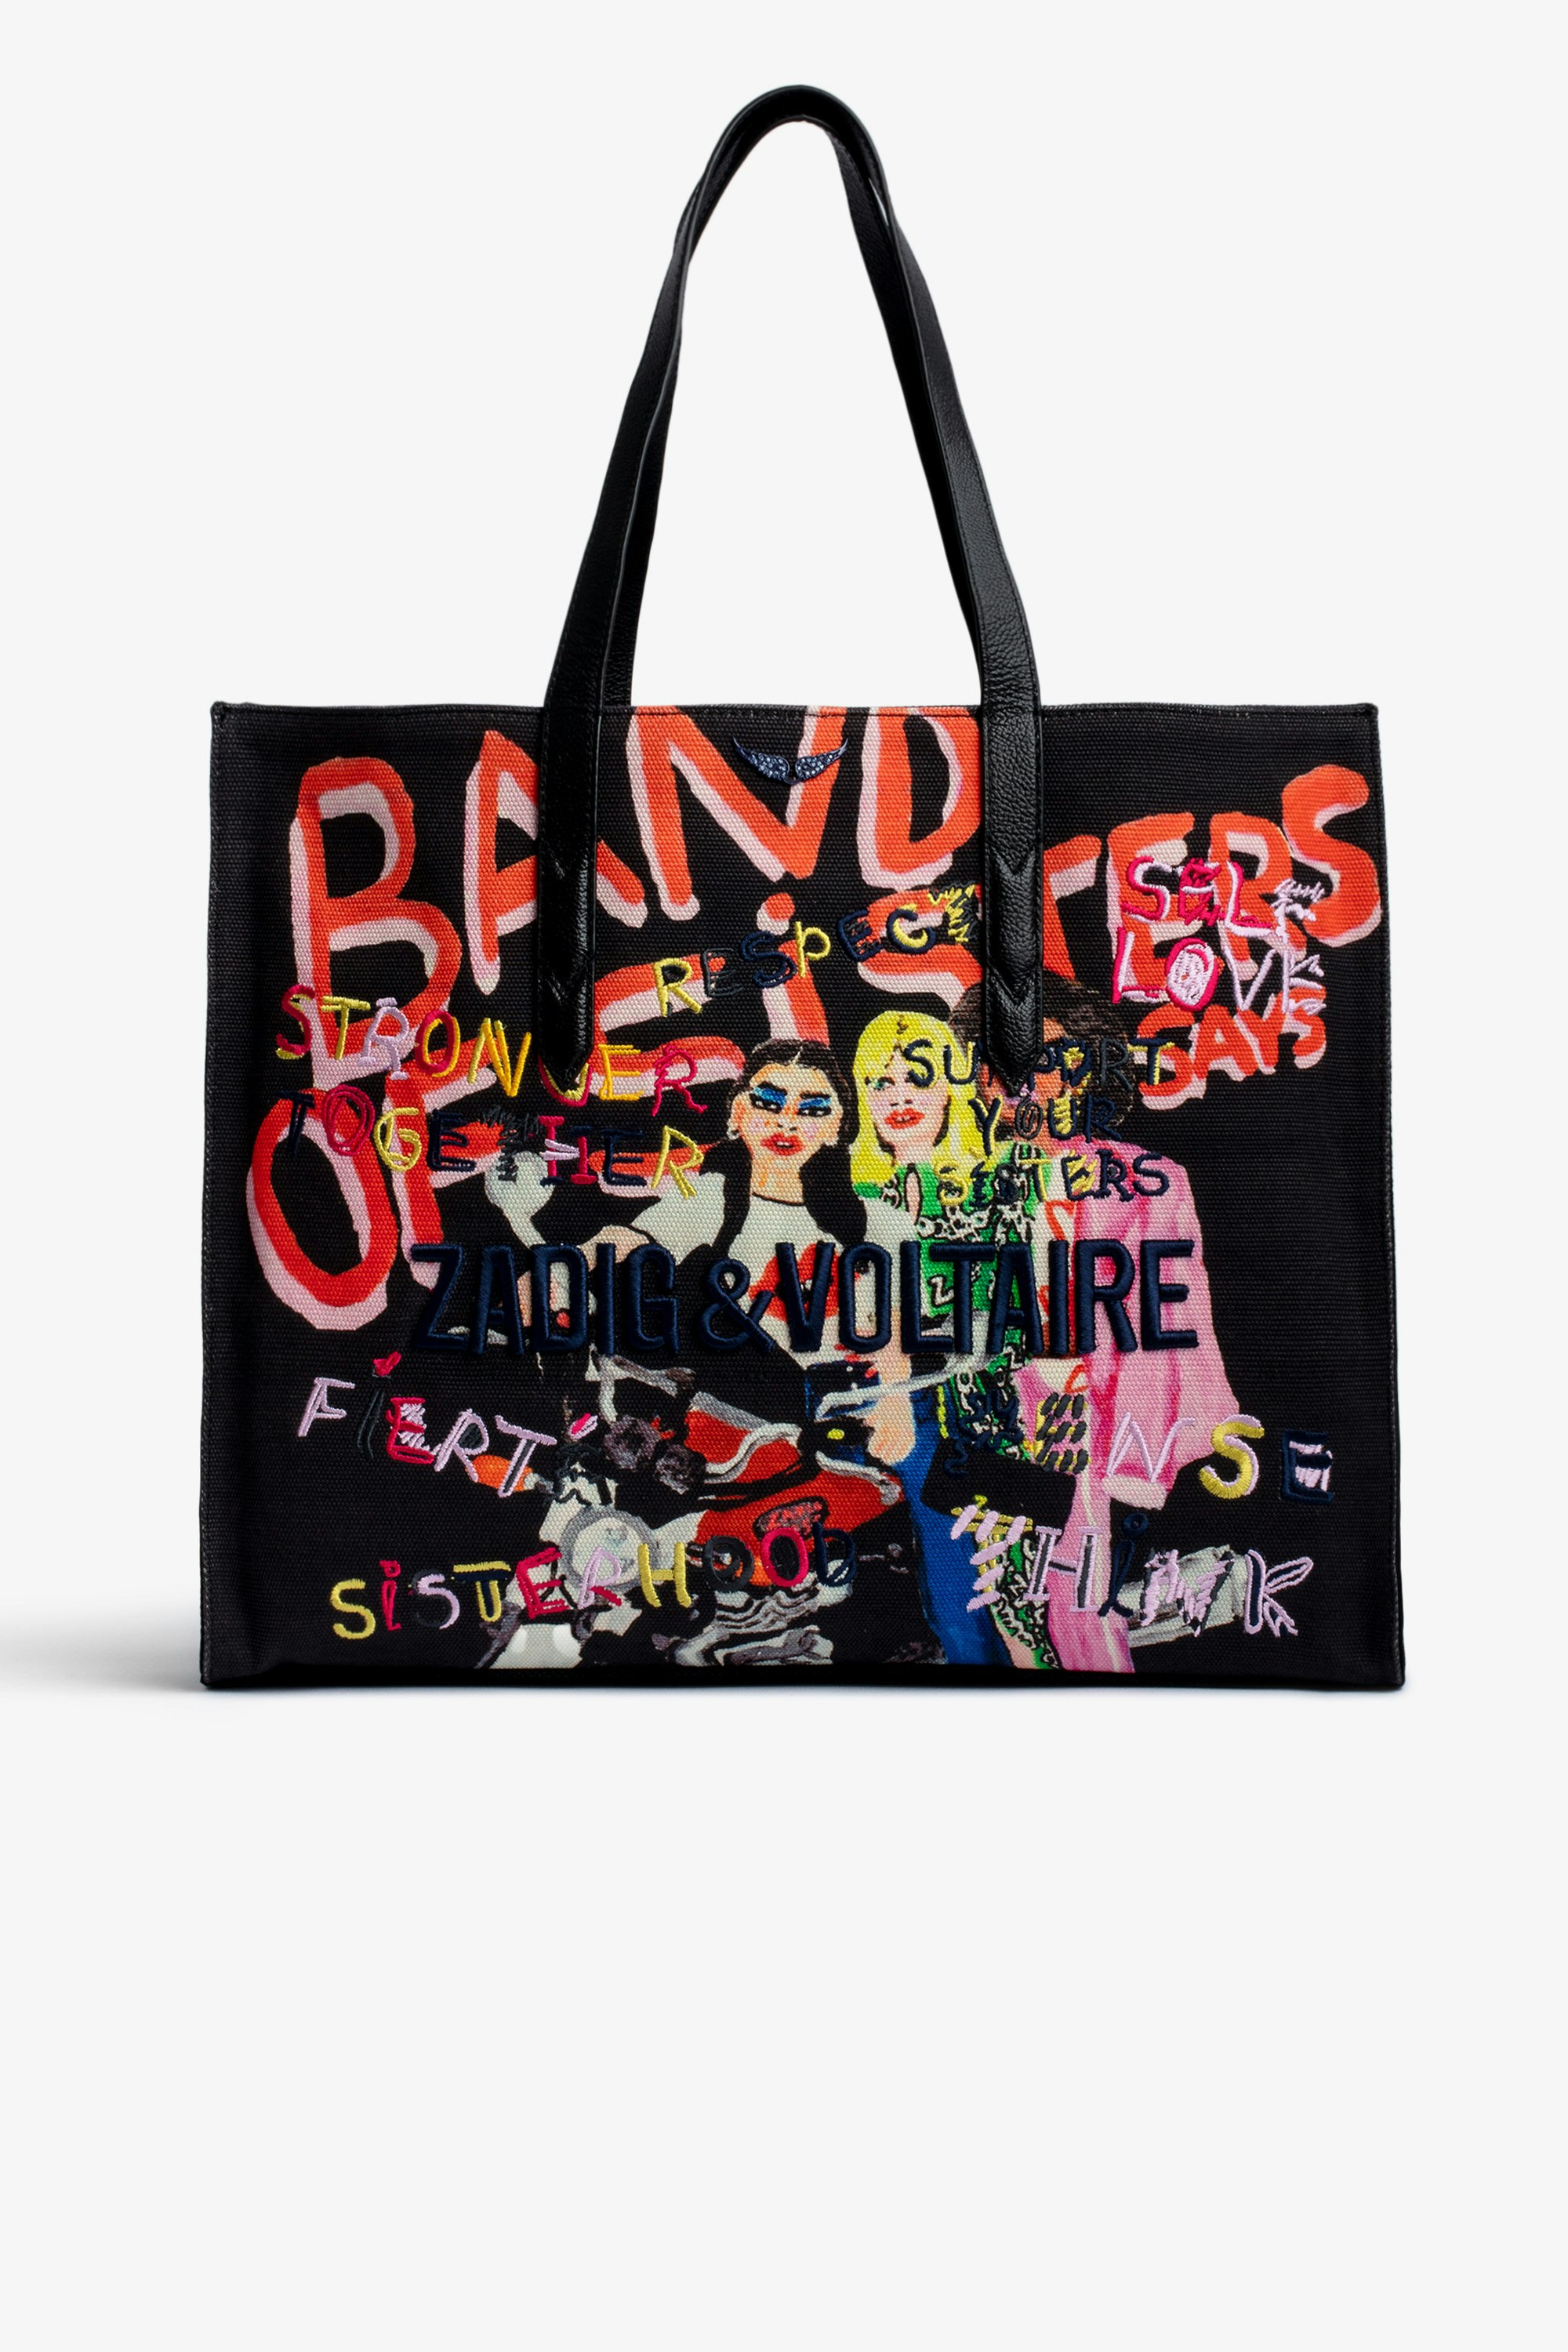 Tasche le Tote Band of Sisters Damentasche Le Tote aus schwarzer Baumwolle Band of Sisters